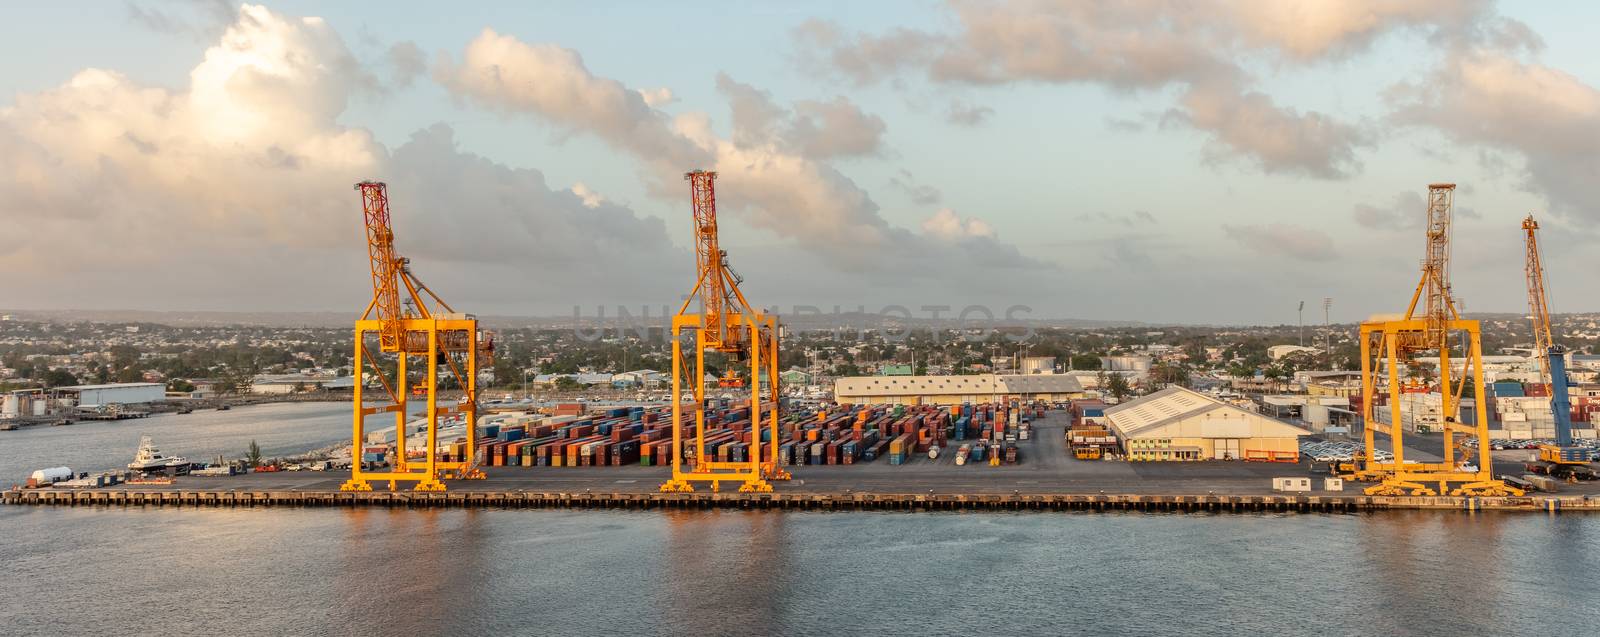 BBridgetown port with loading cranes, containers by DamantisZ